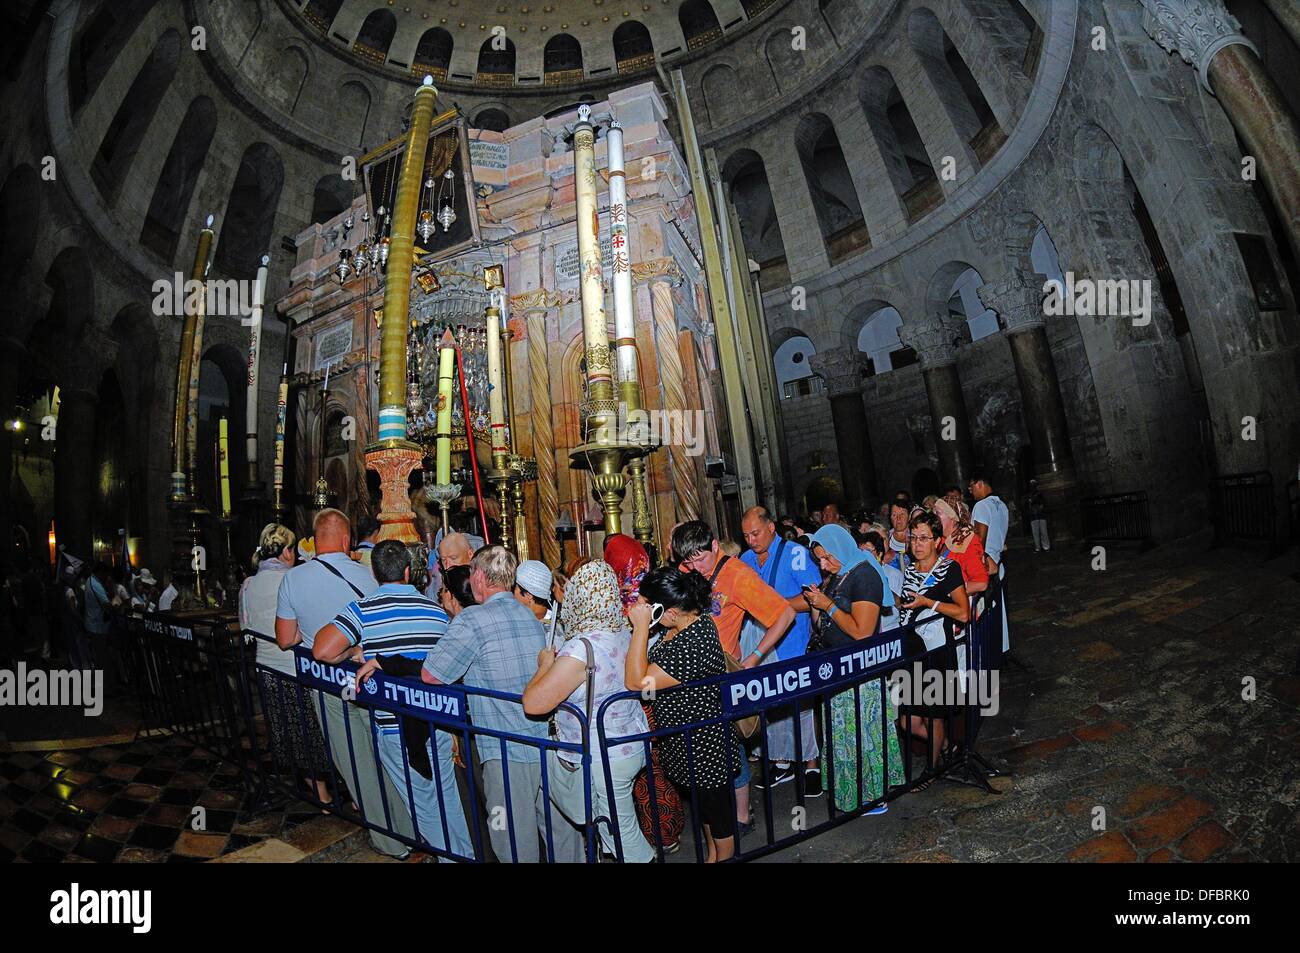 The most important site of the Church of the Holy Sepulchre is the Aedicule (Holy Grave, Grave Chapel), the supposed location of Jesus' grave and the 14th station of the Via Dolorosa, that is visited by thousands of pilgrims and tourists daily, in Jerusalem, Israel, 12 September 2013. The Via Dolorosa (Way of Suffering) is a street in the old town of Jerusalem named after the path Jesus of Nazareth walked to his crucification. Jesus carried the cross, on which he later died via that road from the Antonia Fortress, then seat of Pilate, to Golgotha, the place where his grave is supposedly locate Stock Photo